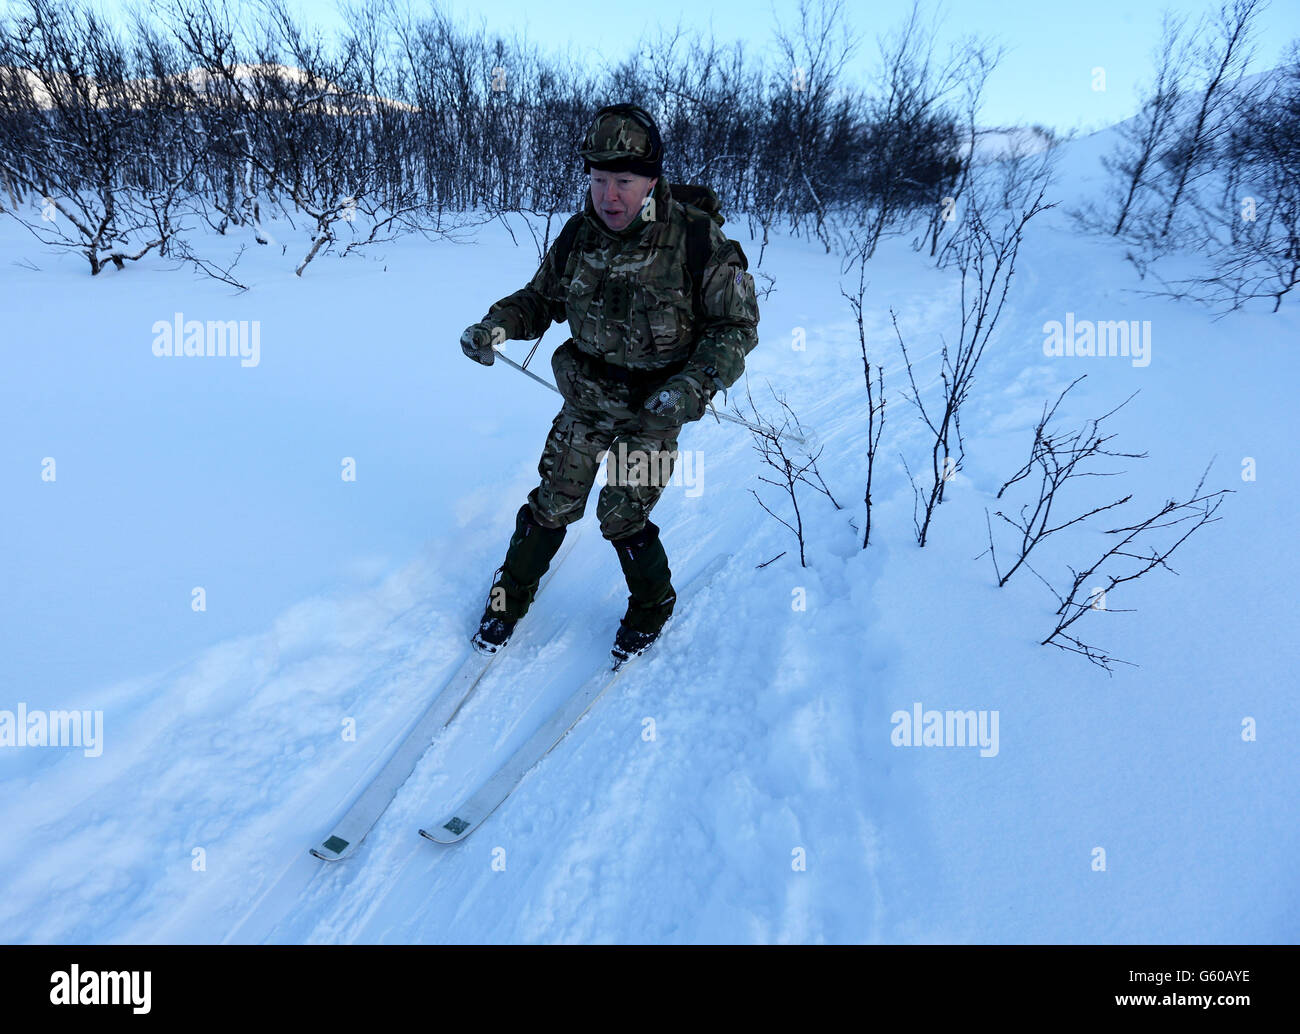 Colonel Rory Bruce of the Royal Marine Reserve and acting commander of the Maritime Reserve on skis, as troops take part in Exercise Hairspring 2013, which focuses on cold weather survival and warfare training for Royal Marines Commando Reservists in the mountains range near to Porsanger Garrison near Lakselv, Norway. Stock Photo